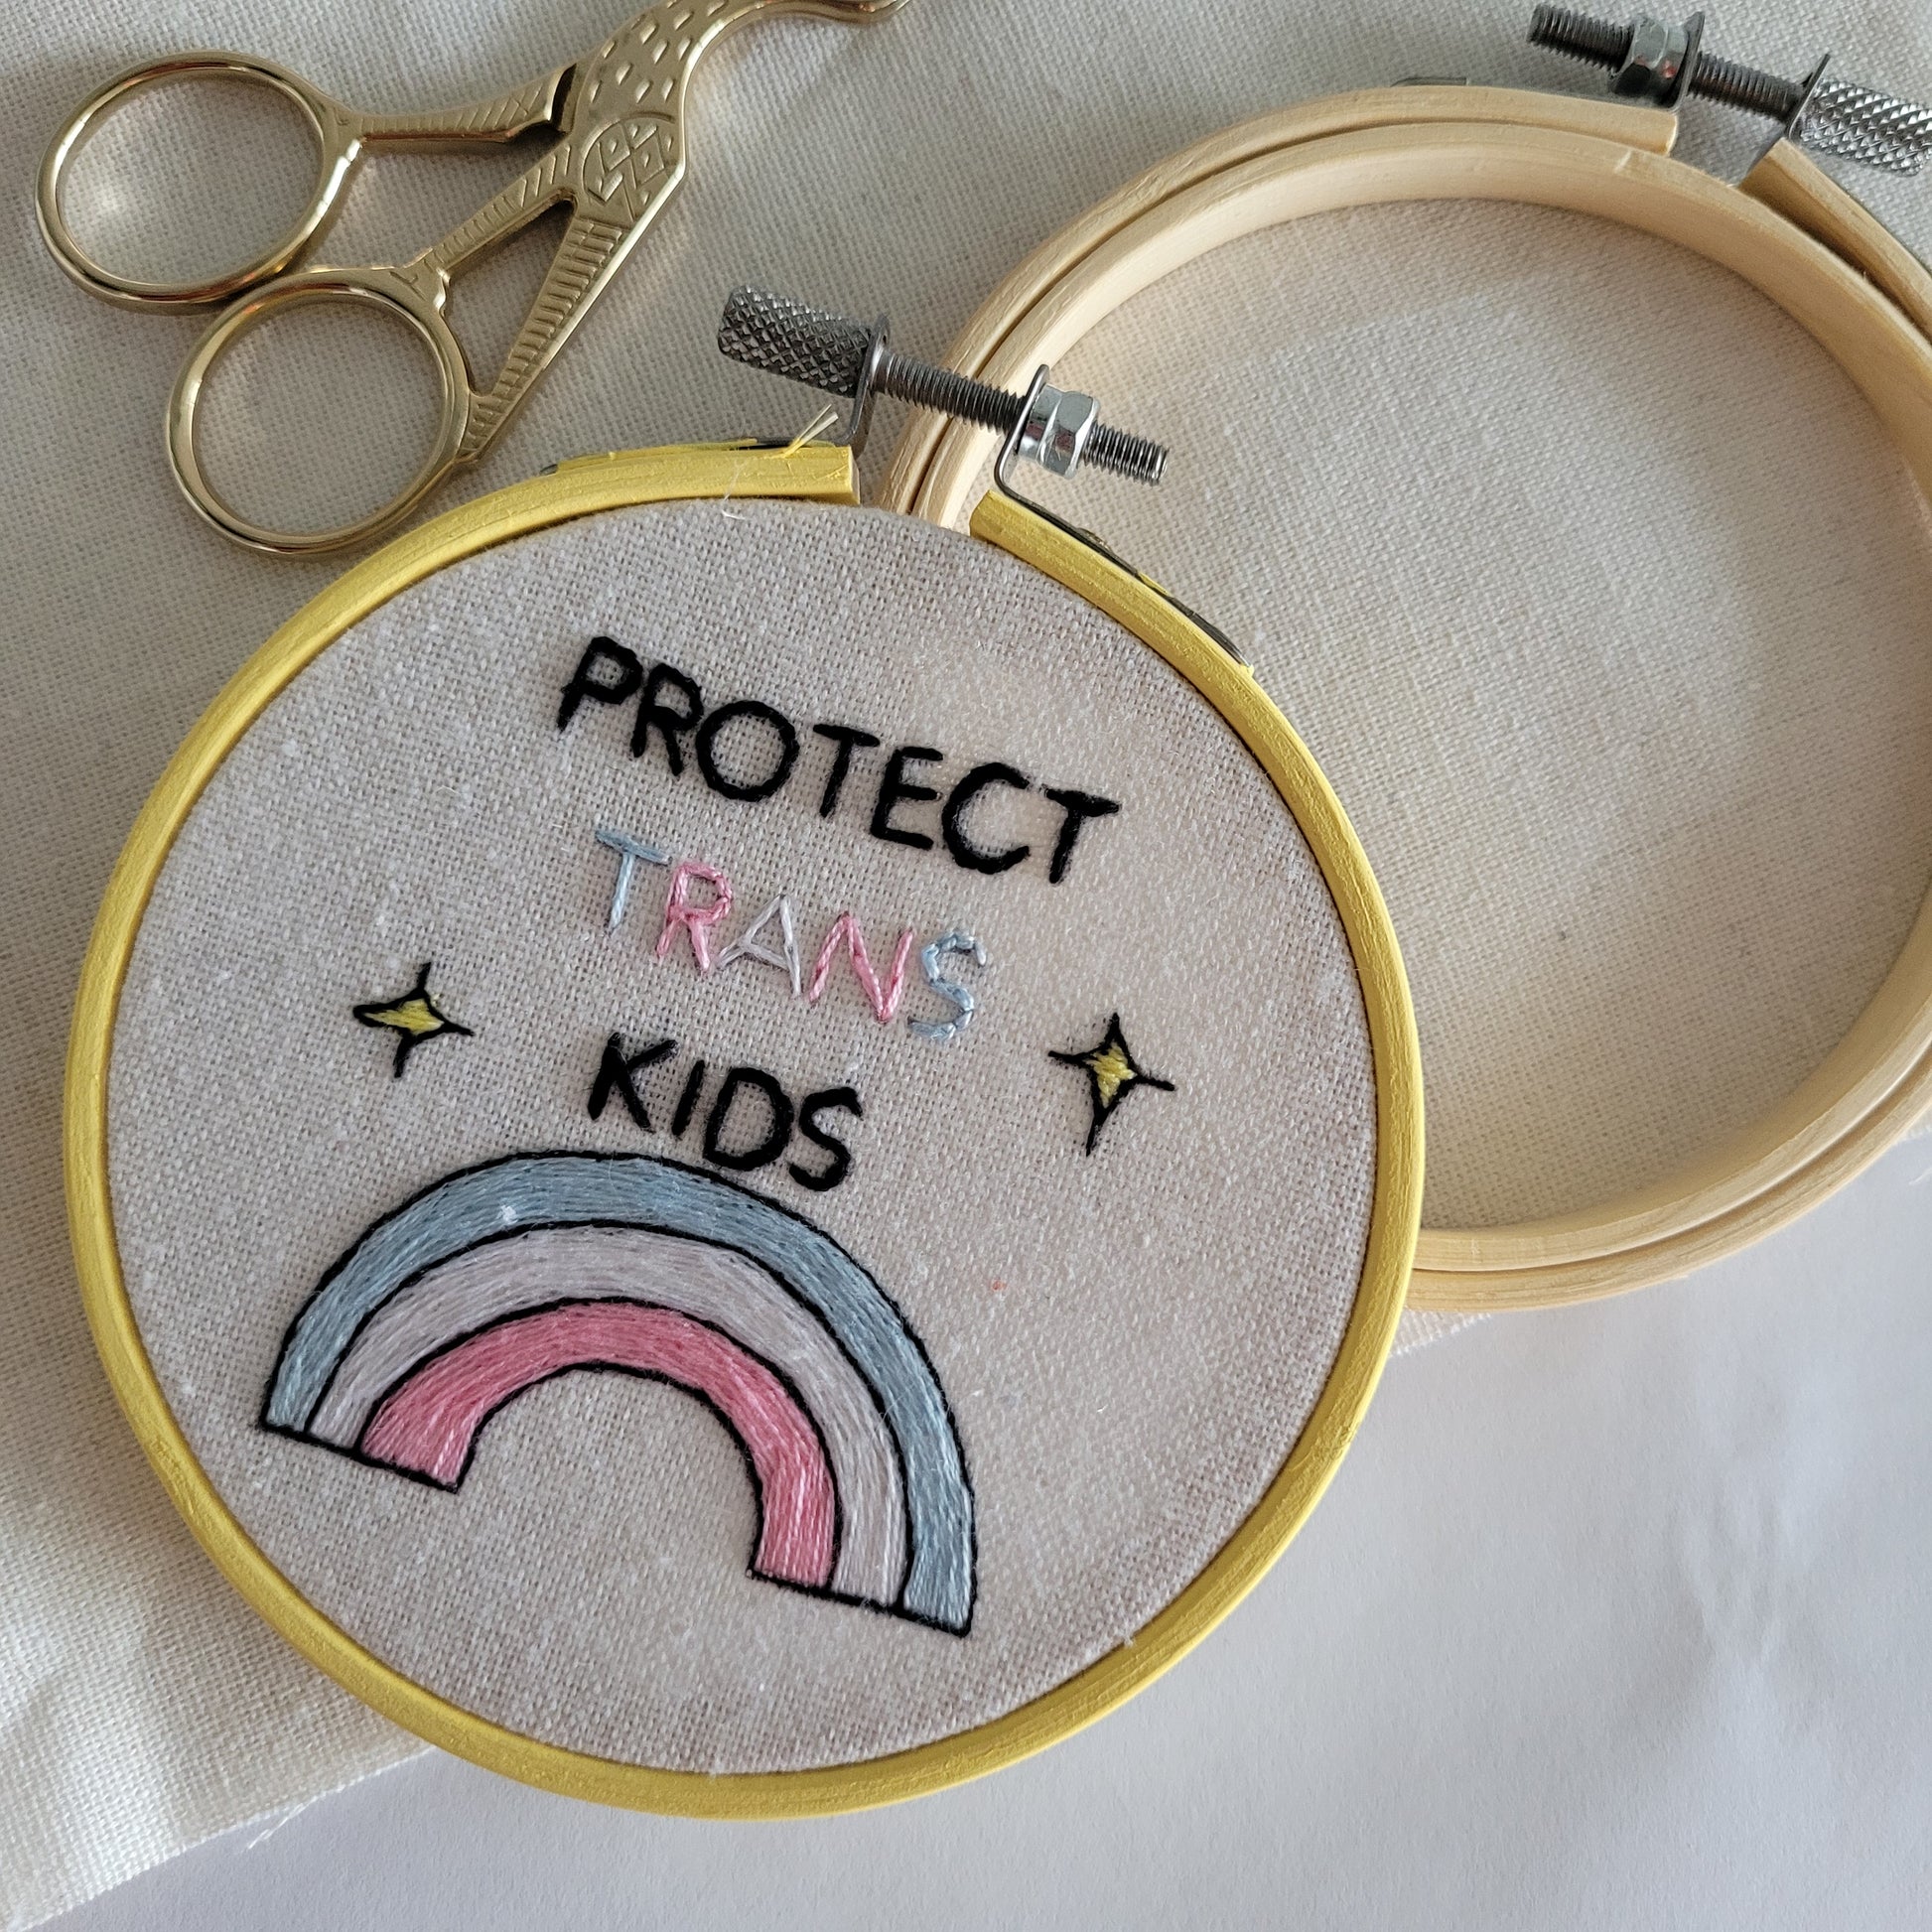 Protext trans kids with a trans coloured rainbow